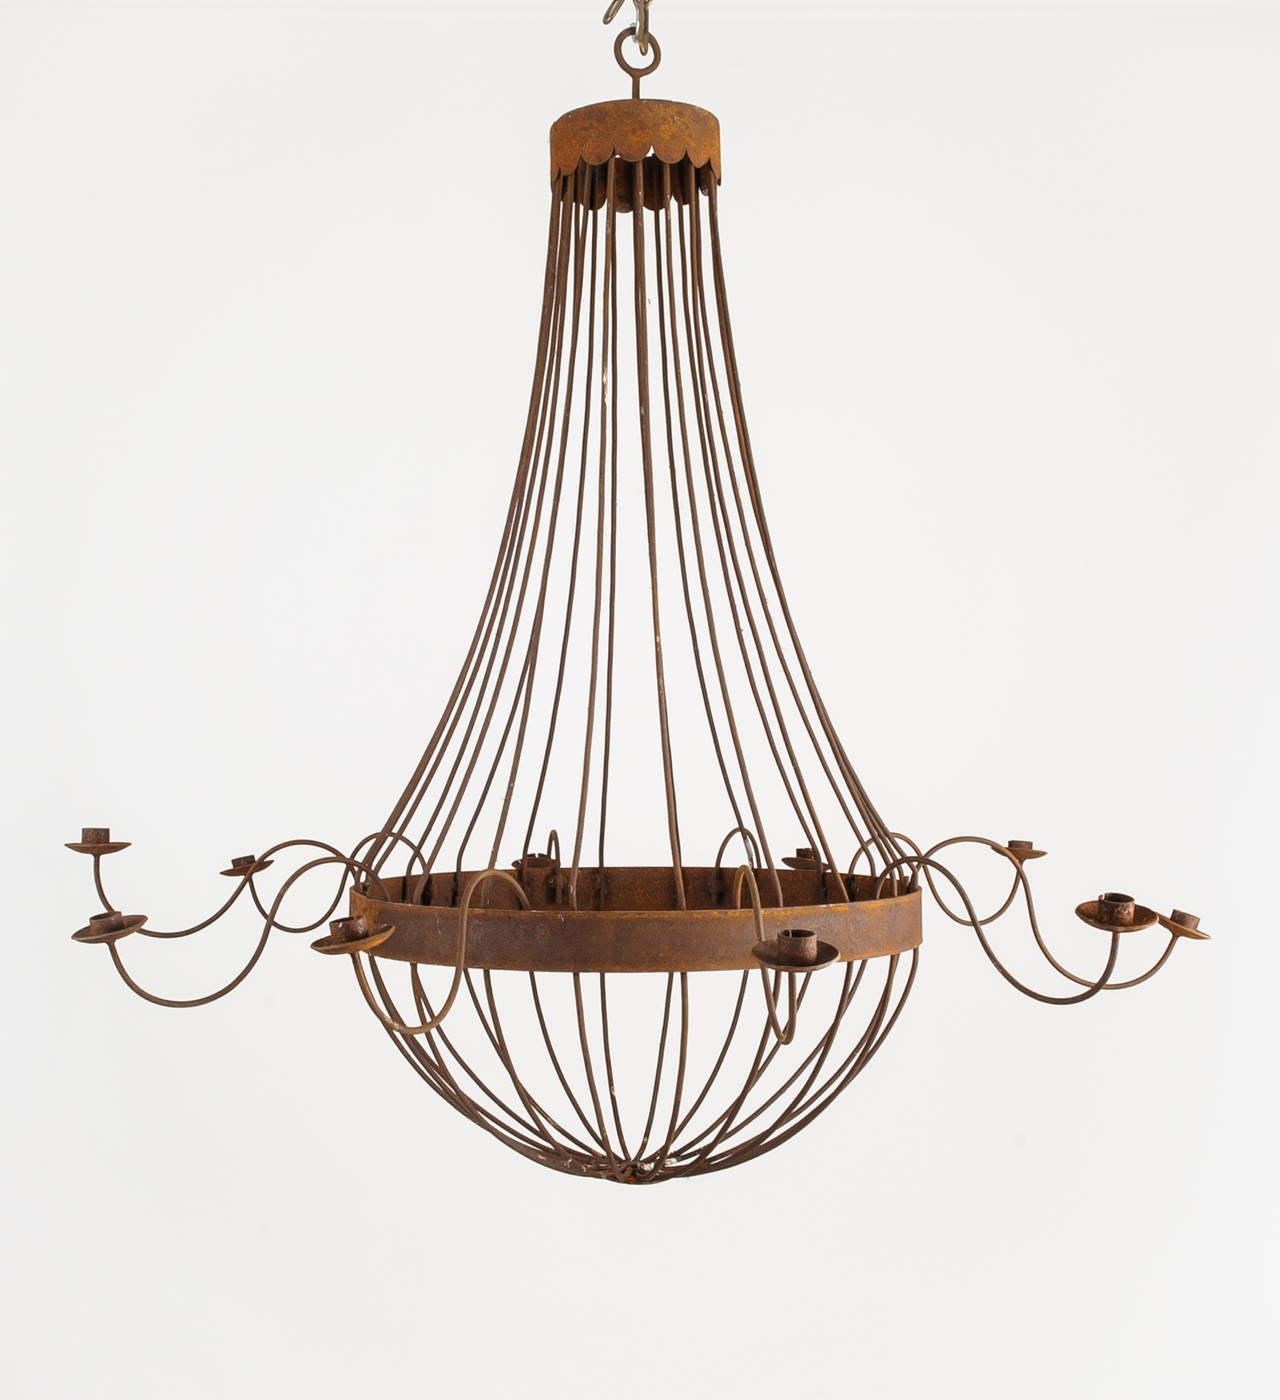 Rusted French bell chandelier with ten arms. This extra large fixture makes a wonderful statement. It is ready to be electrified or use with candles. The arms can be detached for easy shipping.